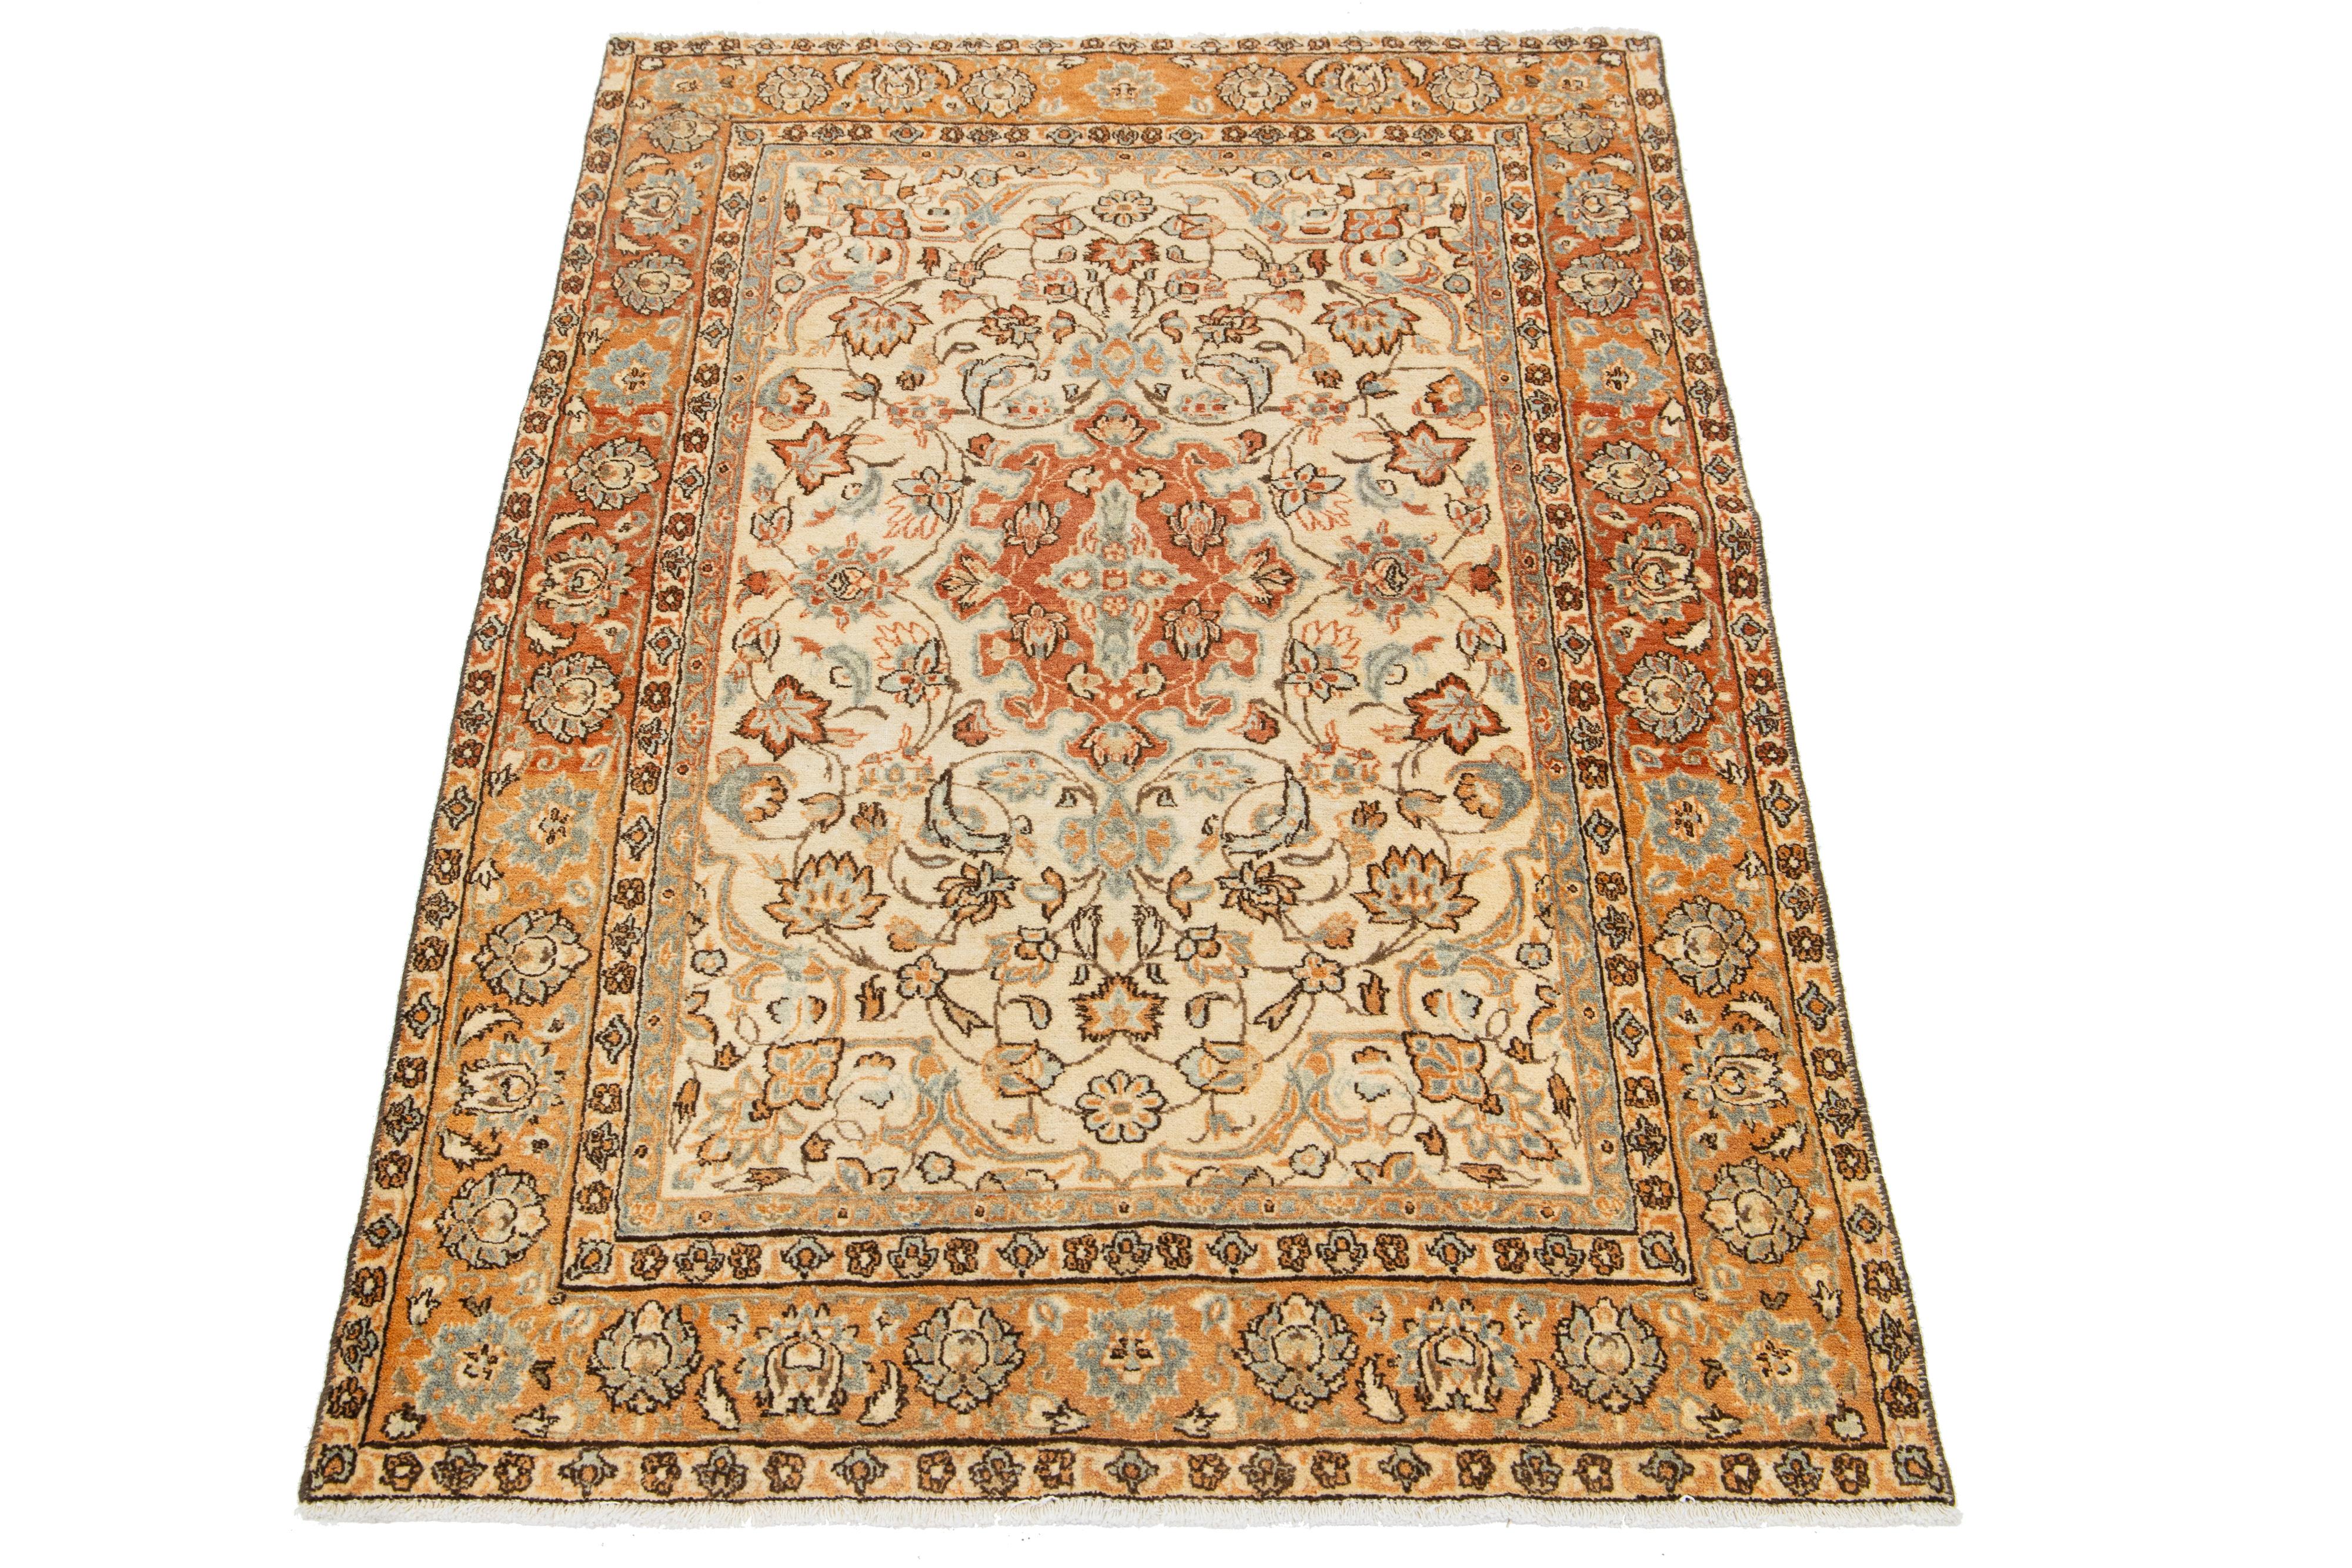 This is a beautiful Vintage Mahal hand-knotted wool rug with a beige-colored field. The floral motif of this Persian rug is adorned with gray, rust, and brown hues.

This rug measures 3'4